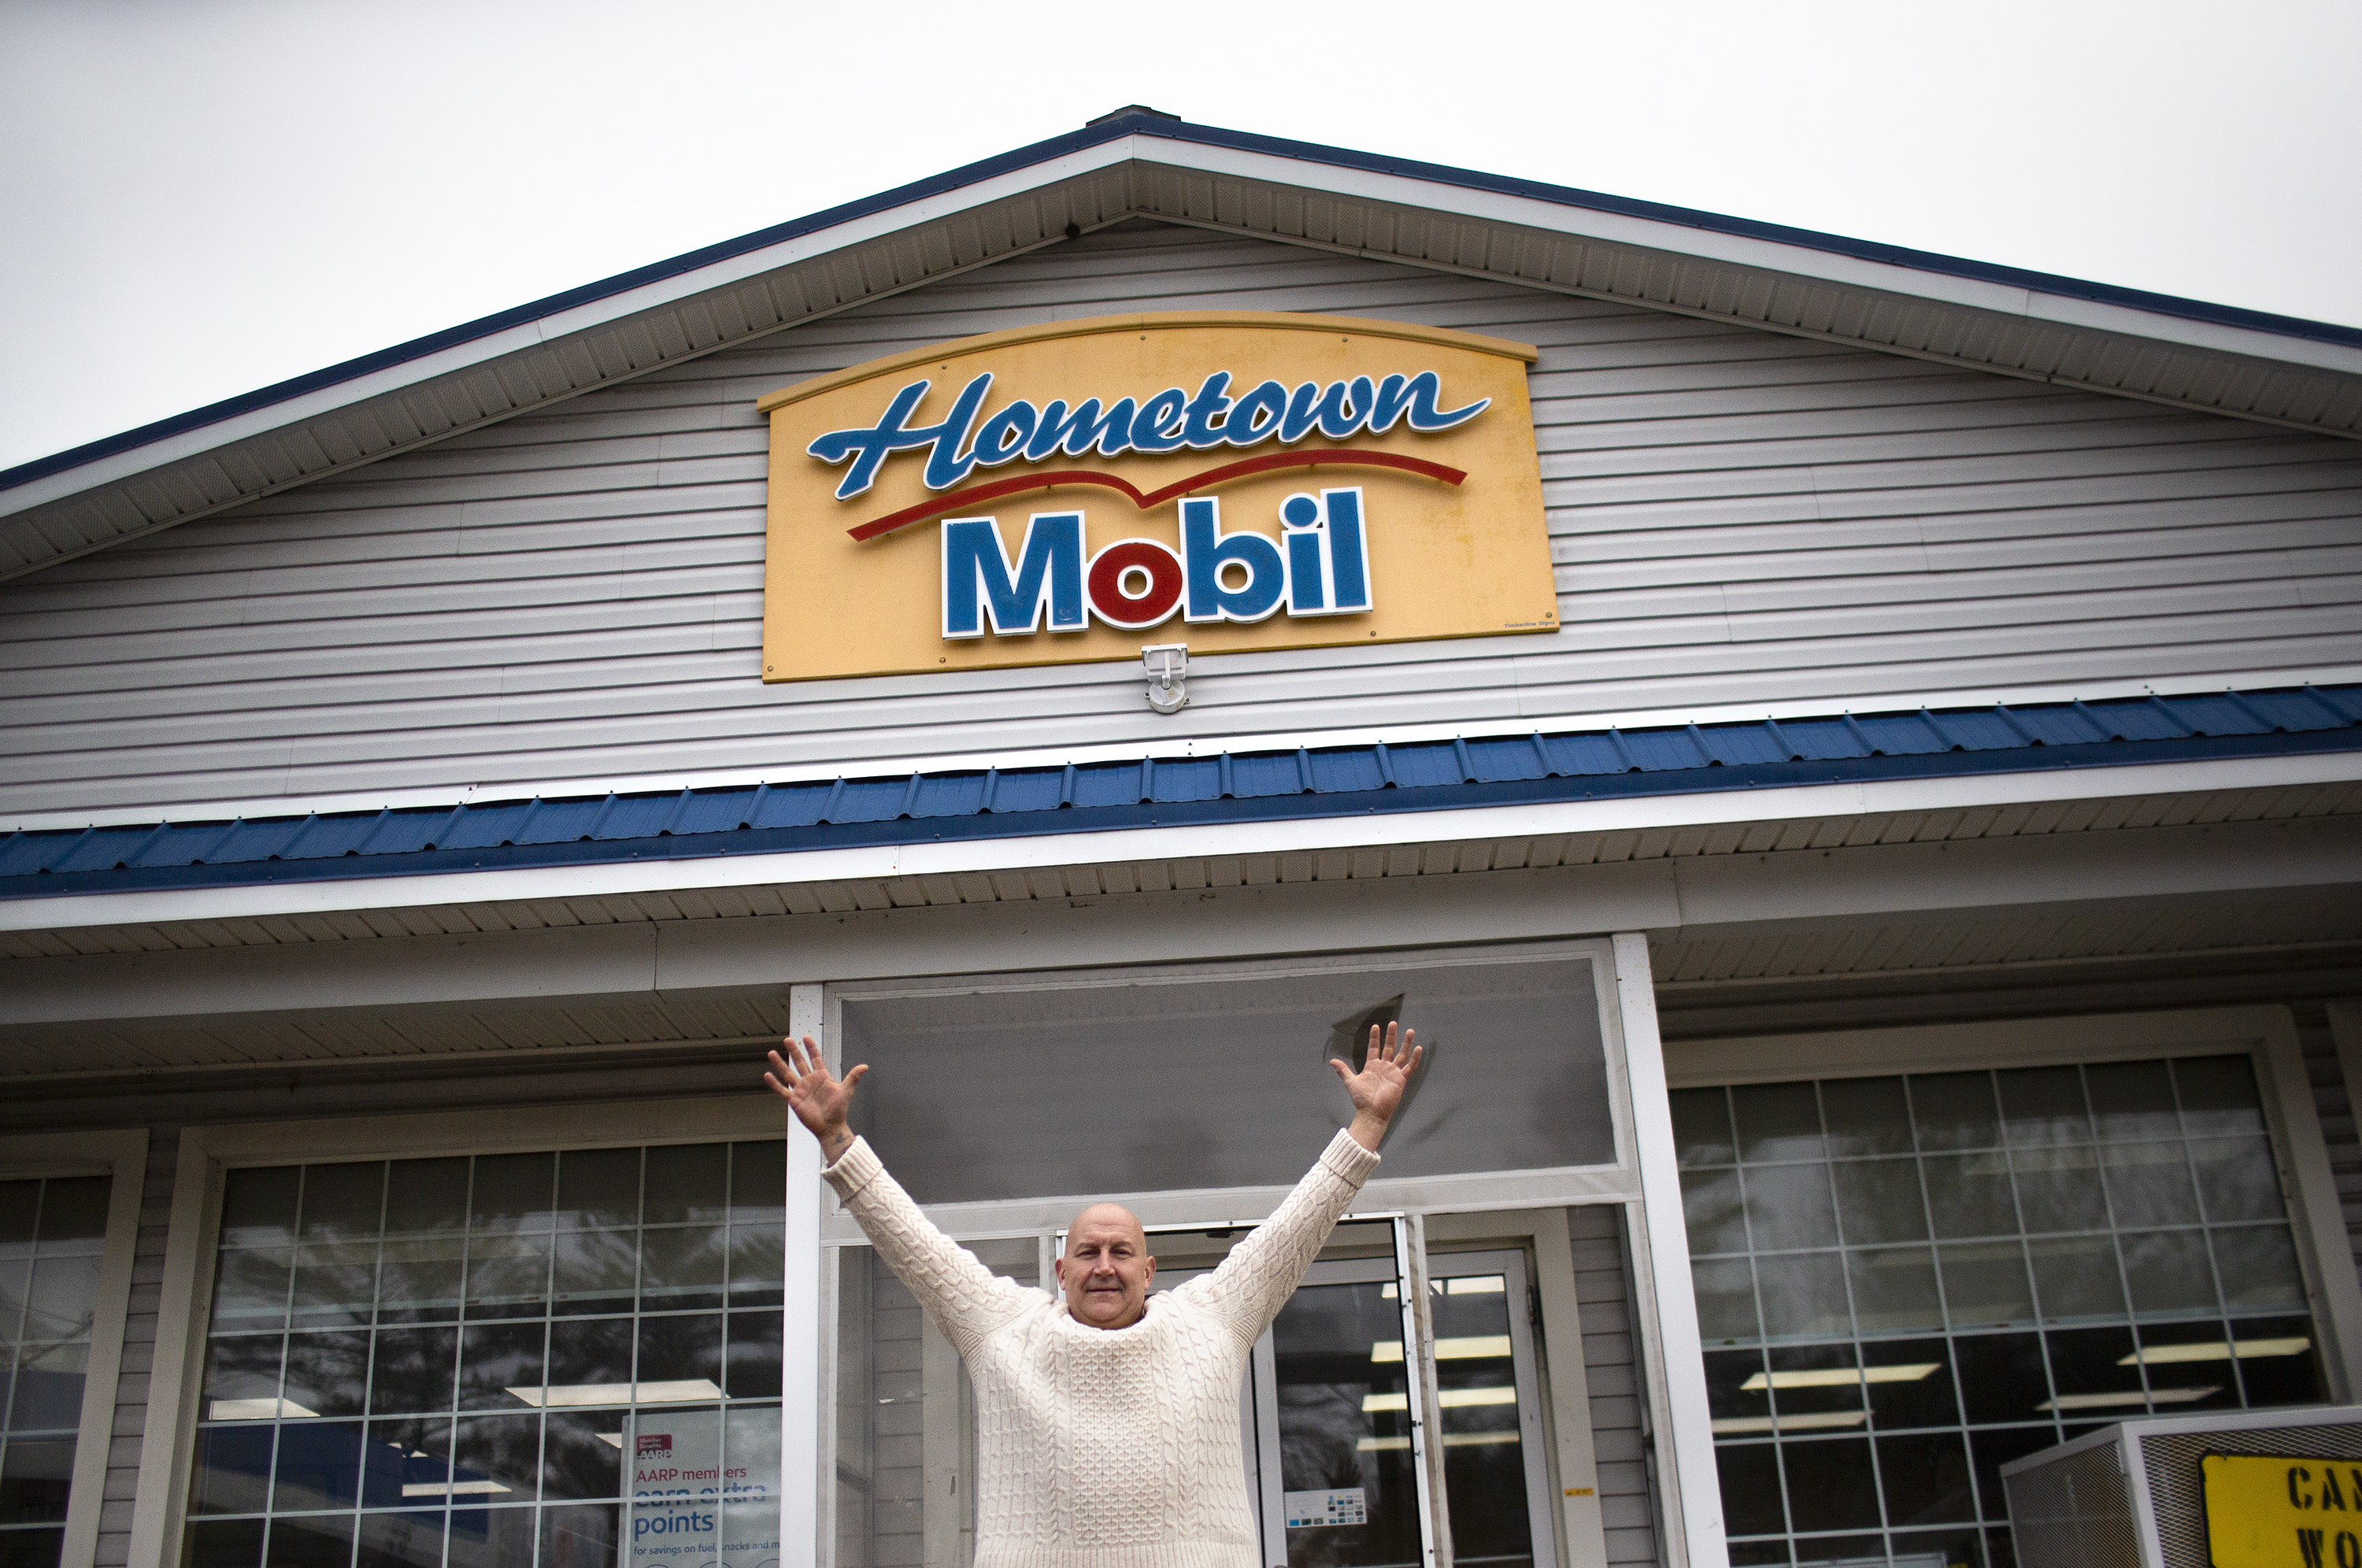 A Mega Millions ticket purchased in Lebanon, Maine, matched the winning numbers for the estimated $1.35 billion grand prize for the Mega Millions lottery game on Friday, Jan. 13, 2023. Fred Cotreau, owner of Hometown Gas & Grill stands in front of the convenience store where the winning ticket was sold on either Thursday or Friday.